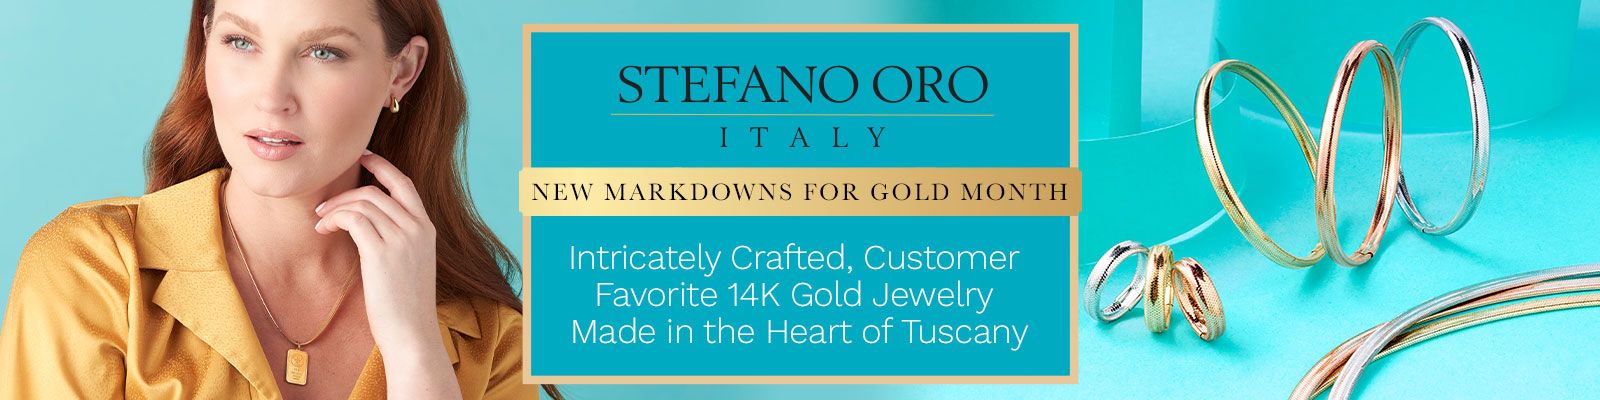 Stefano Oro | Intricately Crafted, Customer Favorite 14K Gold Jewelry Made in the Heart of Tuscany | 203-711 211-447 211-444 211-436